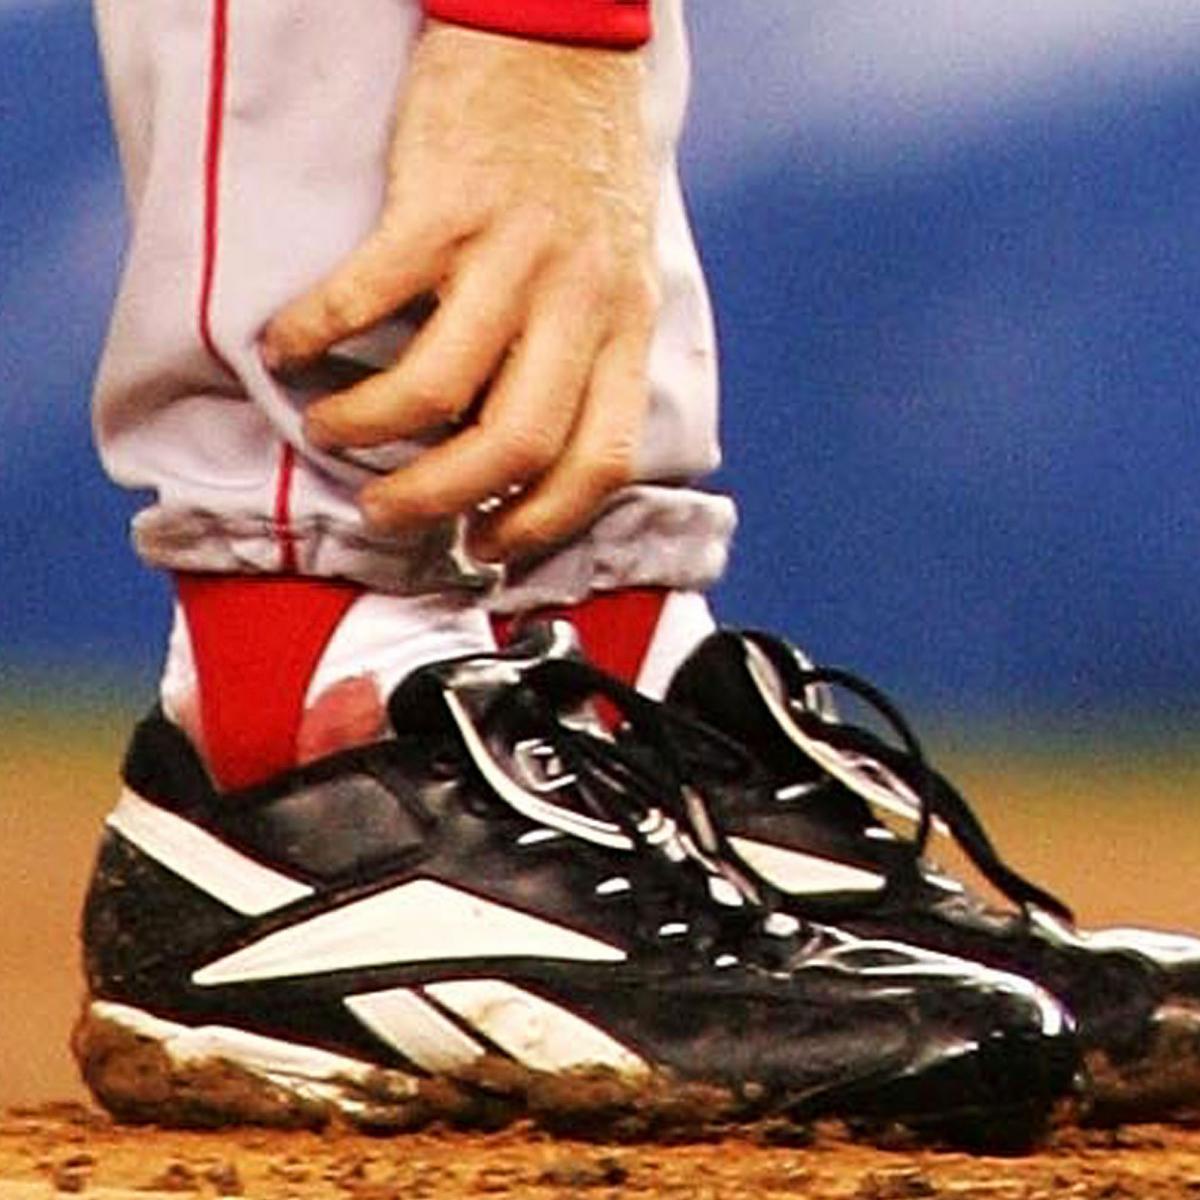 Curt Schilling Selling off 2nd Most Famous Bloody Sock at Auction